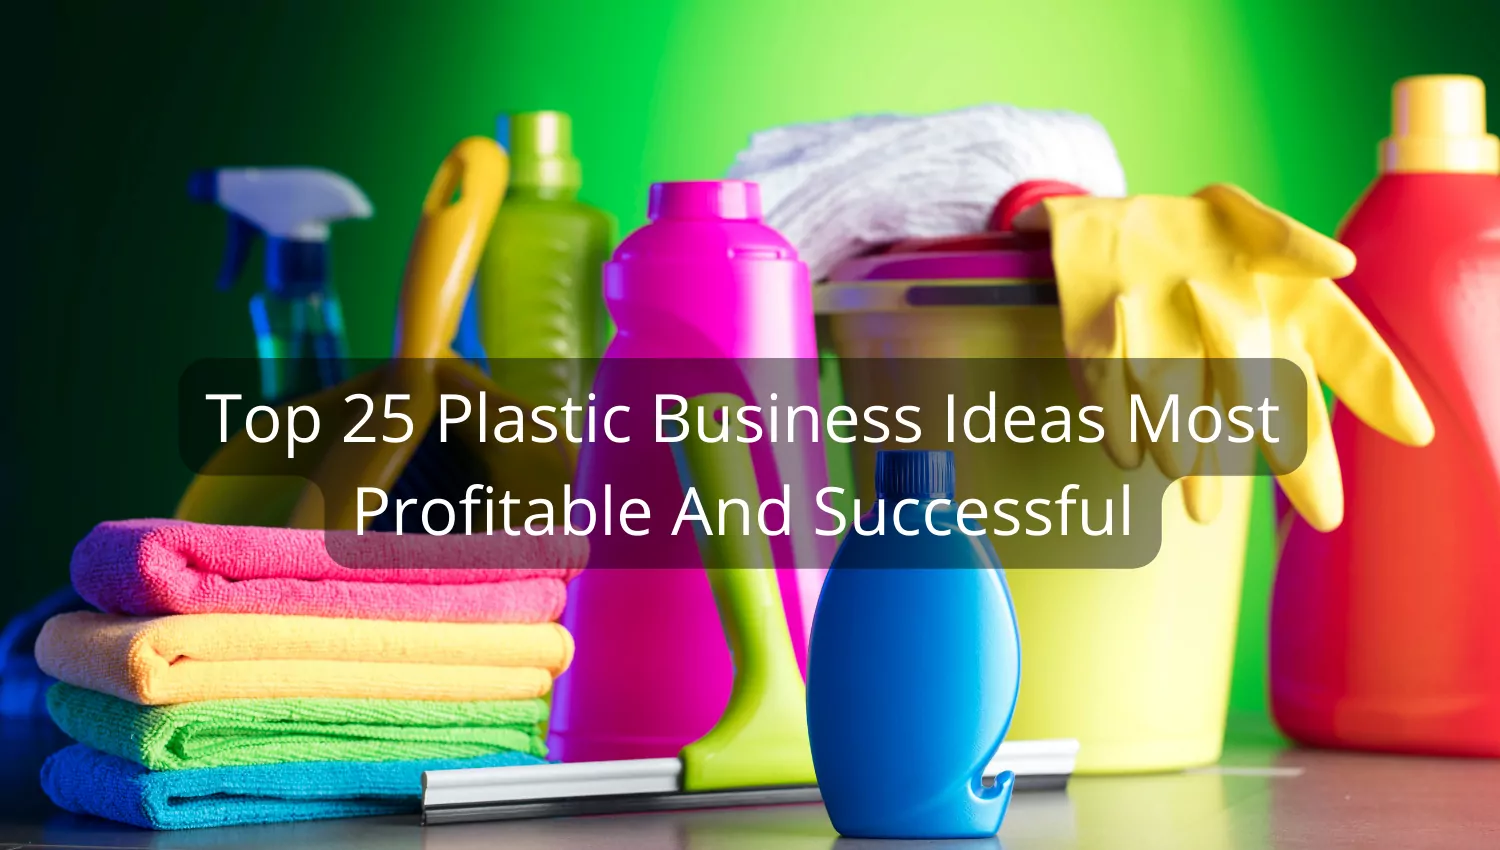 Top 25 Plastic Business Ideas Most Profitable And Successful